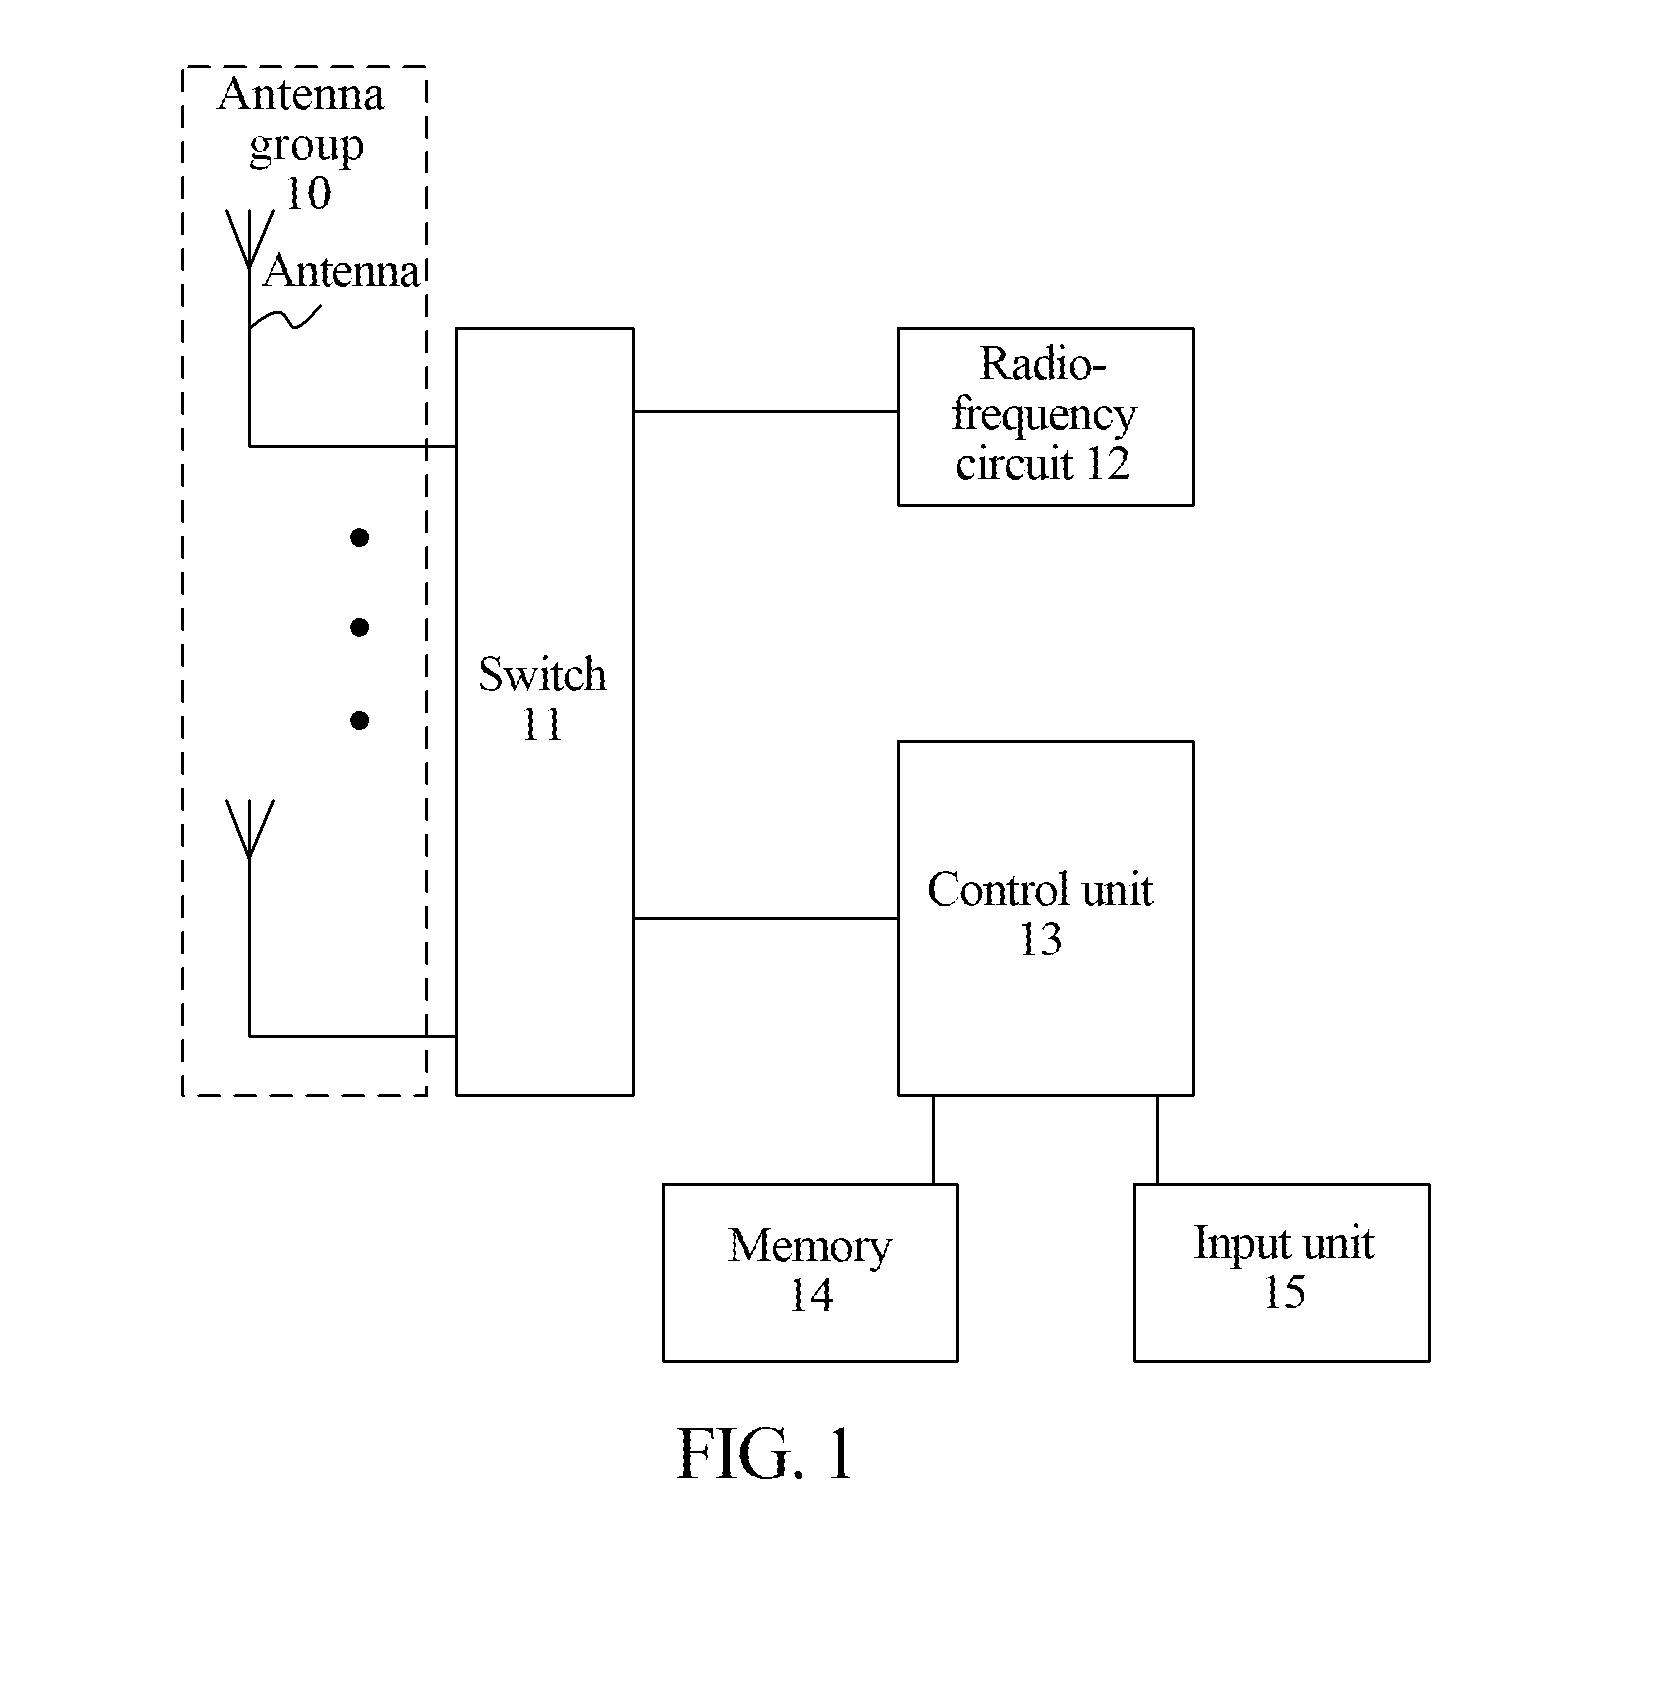 Mobile terminal and specific absorption rate reduction method